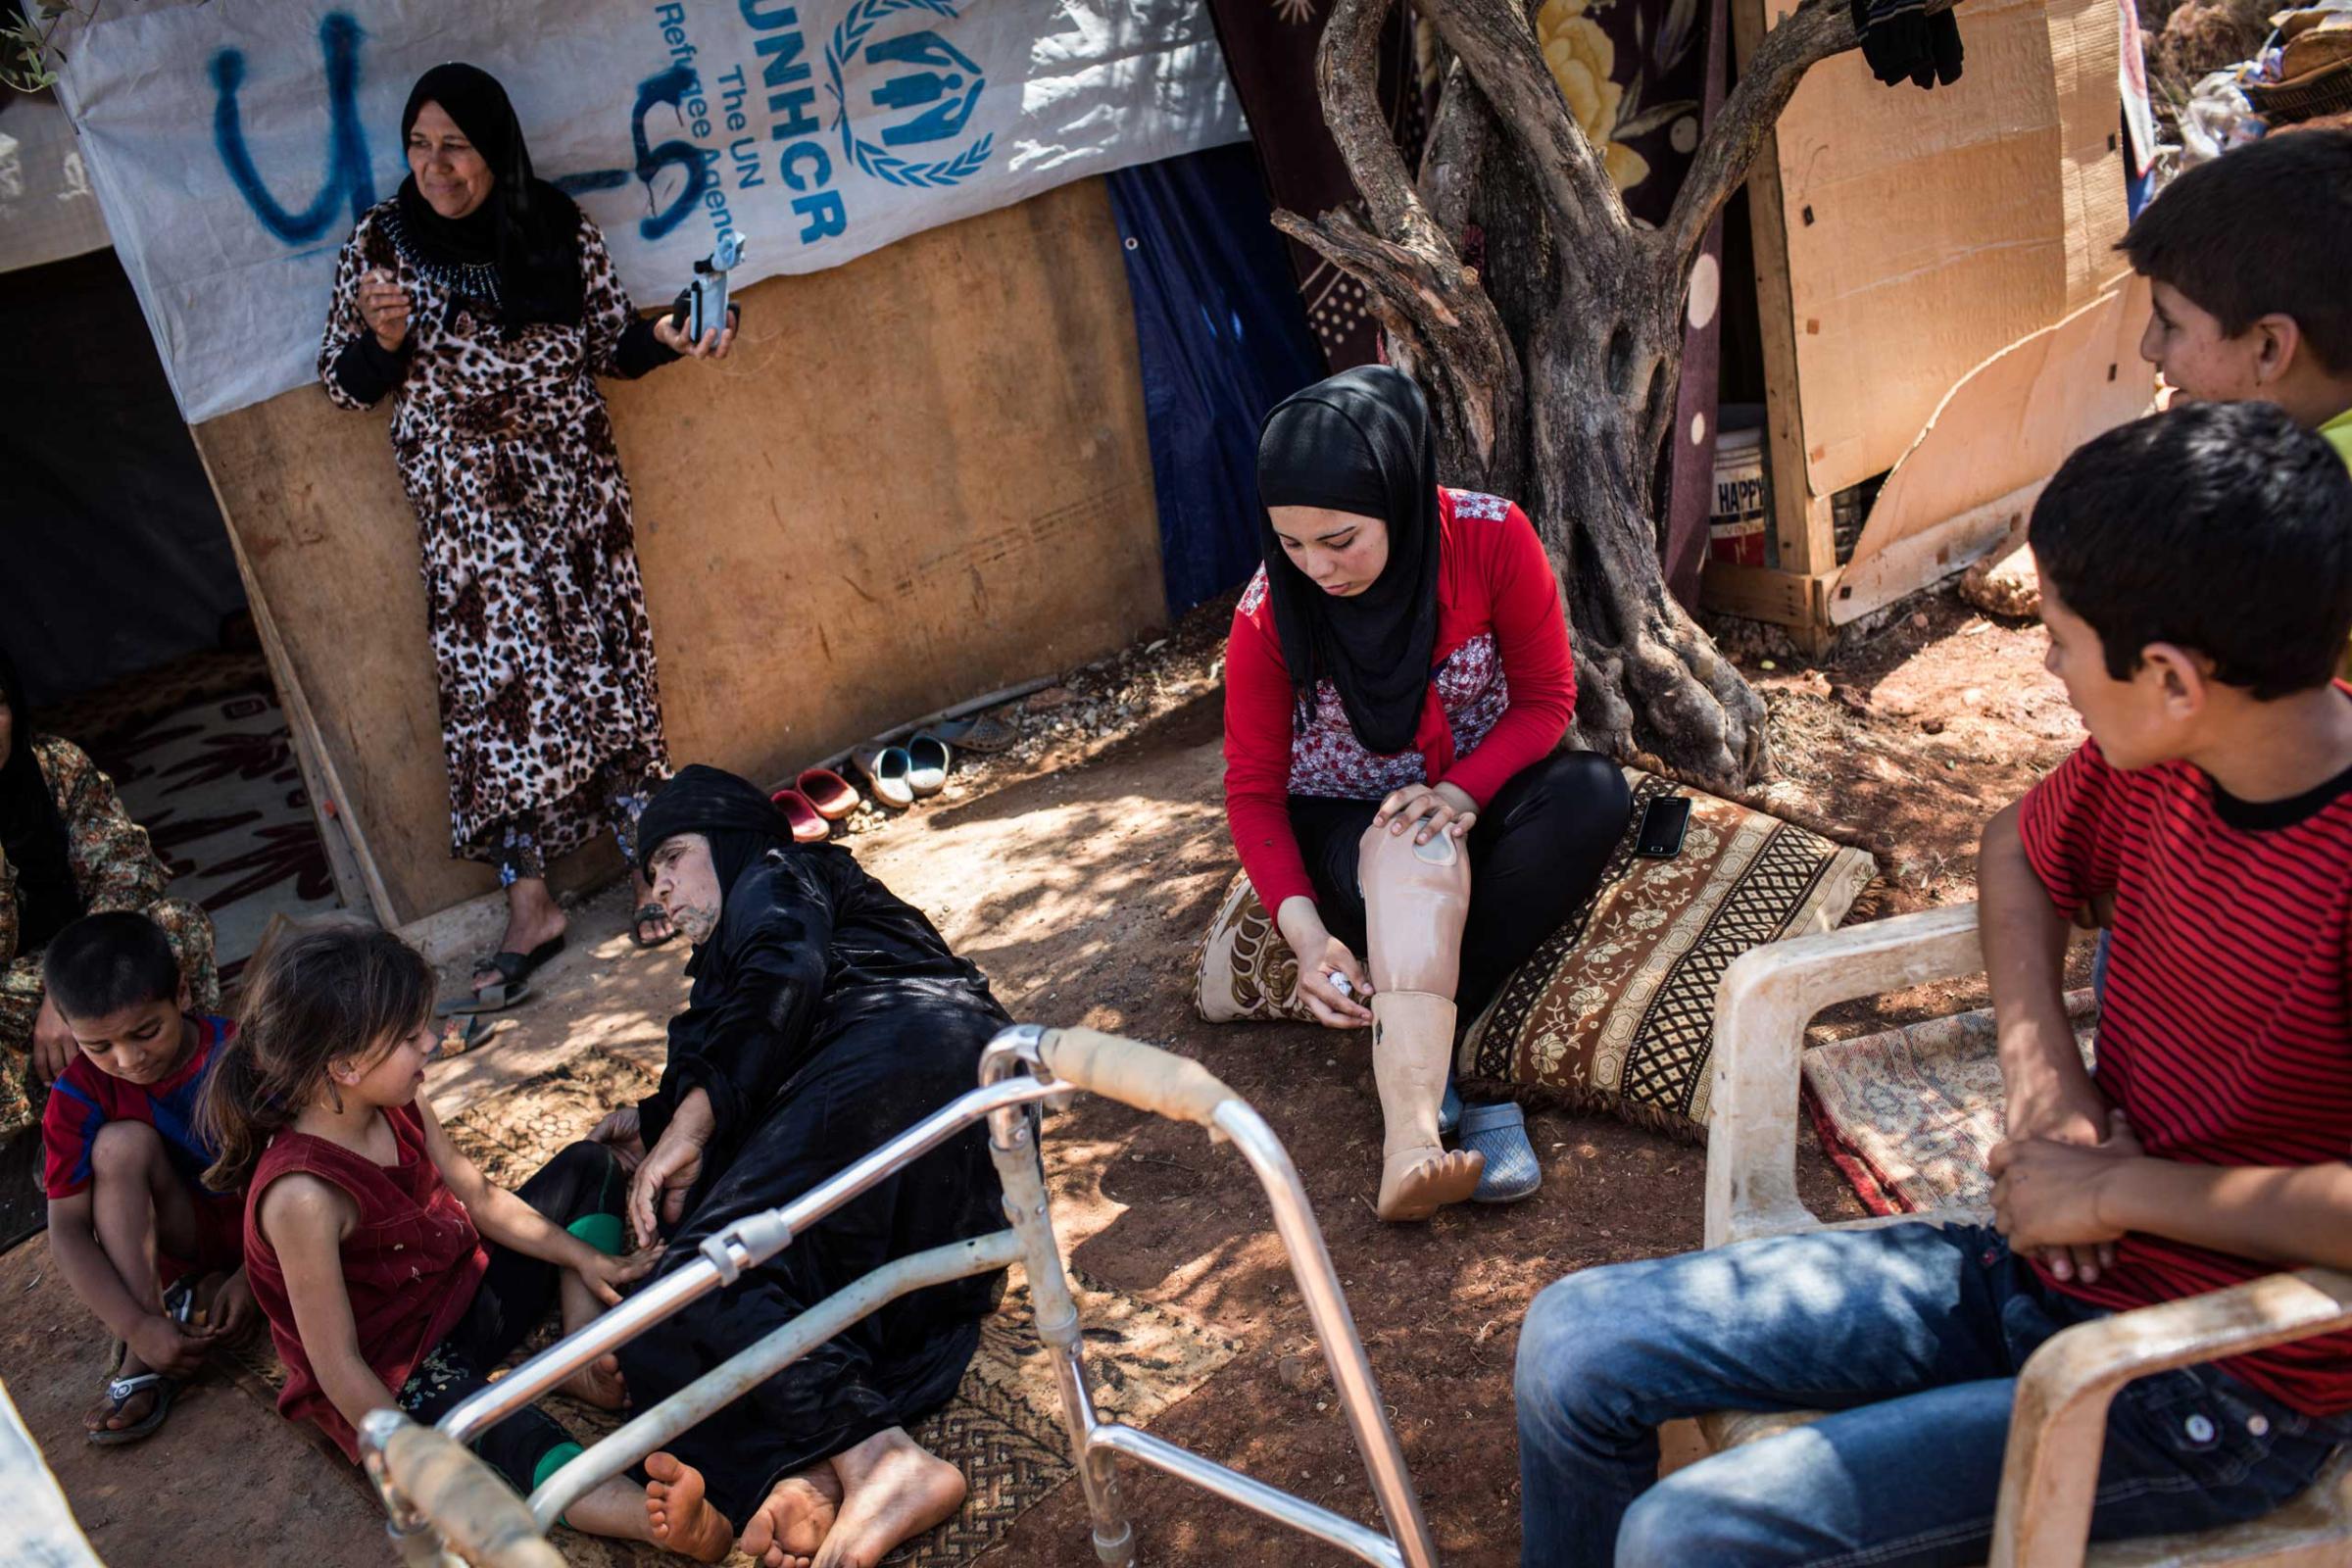 Fatima, 15, at an informal settlement near Tripoli, Lebanon, June 24, 2014. She was going to Homs in 2011 with her father and brother when a bomb fell. She was depressed after receiving an ill-fitting prosthetic but later got a better one.